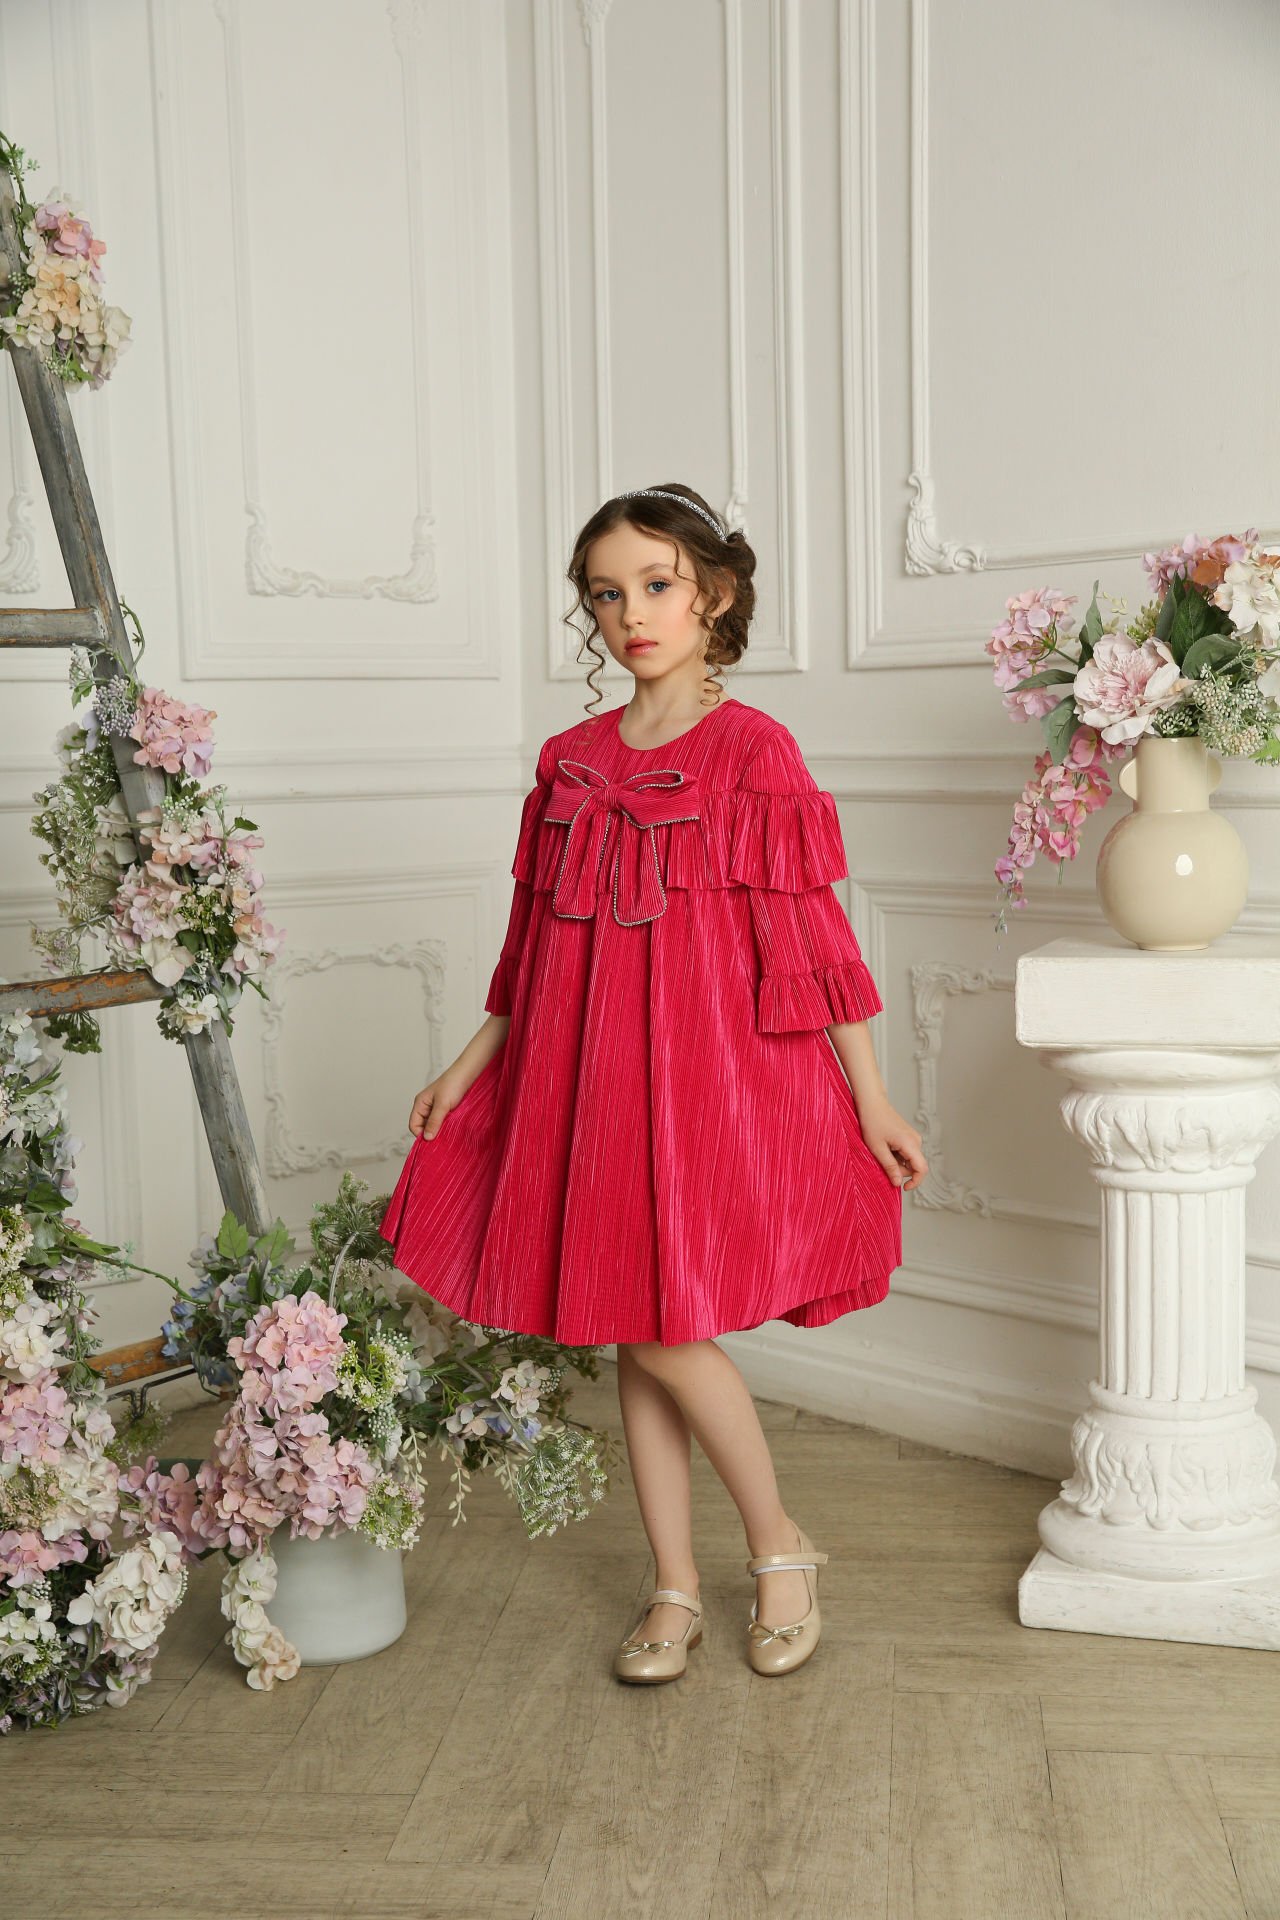 Light Party Dress With Hair Accessory Fuchsia Color